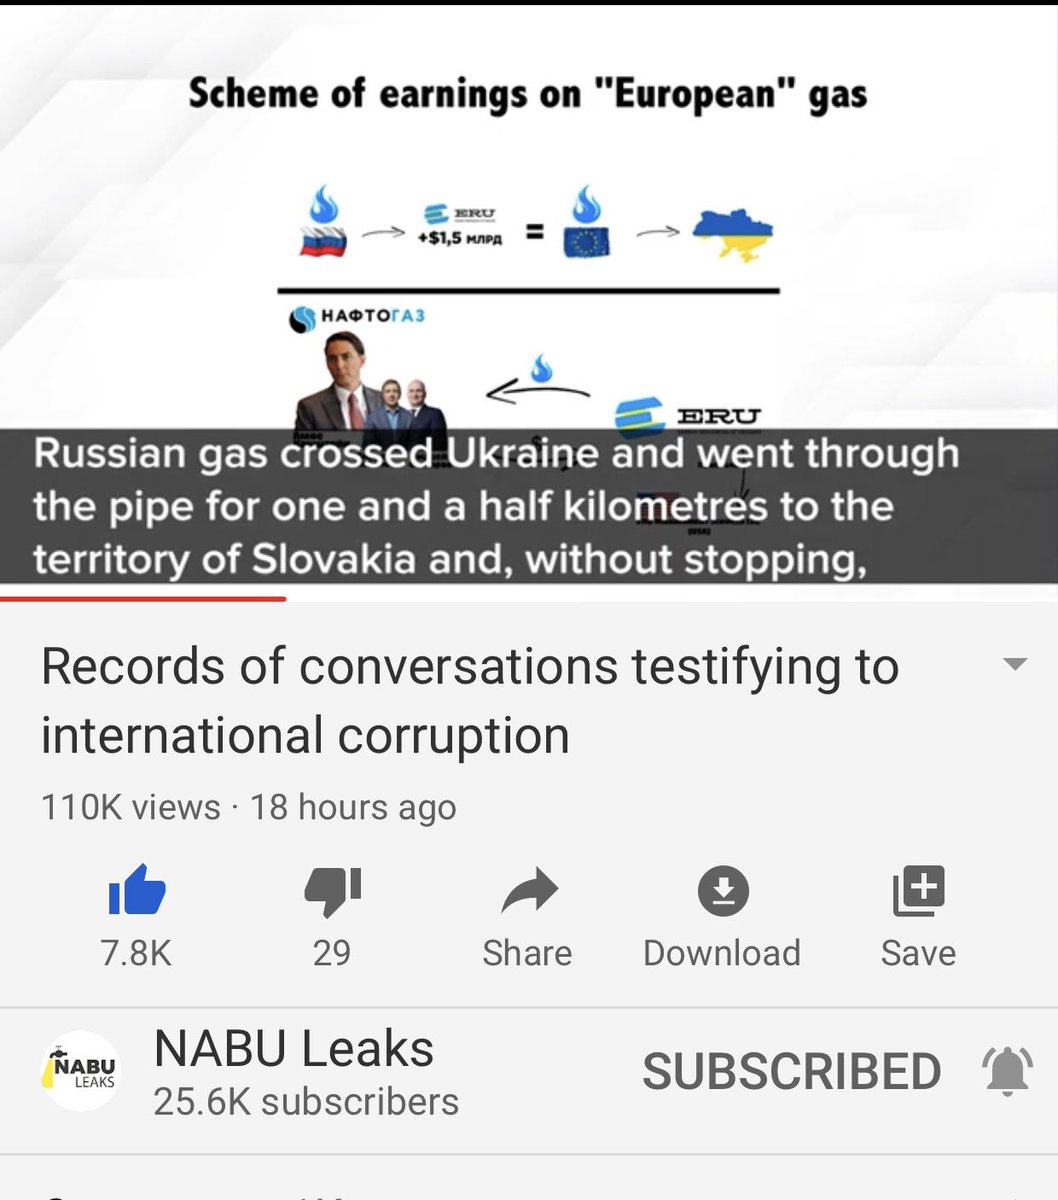 He’s outlining here how they were able to create this laundered effect with the gas, with it goin via pipe to Slovakia and then returned to Ukraine, now making it “European” has when it’s still clearly Ukrainian. Note he calls the scumbags “heroes” lol